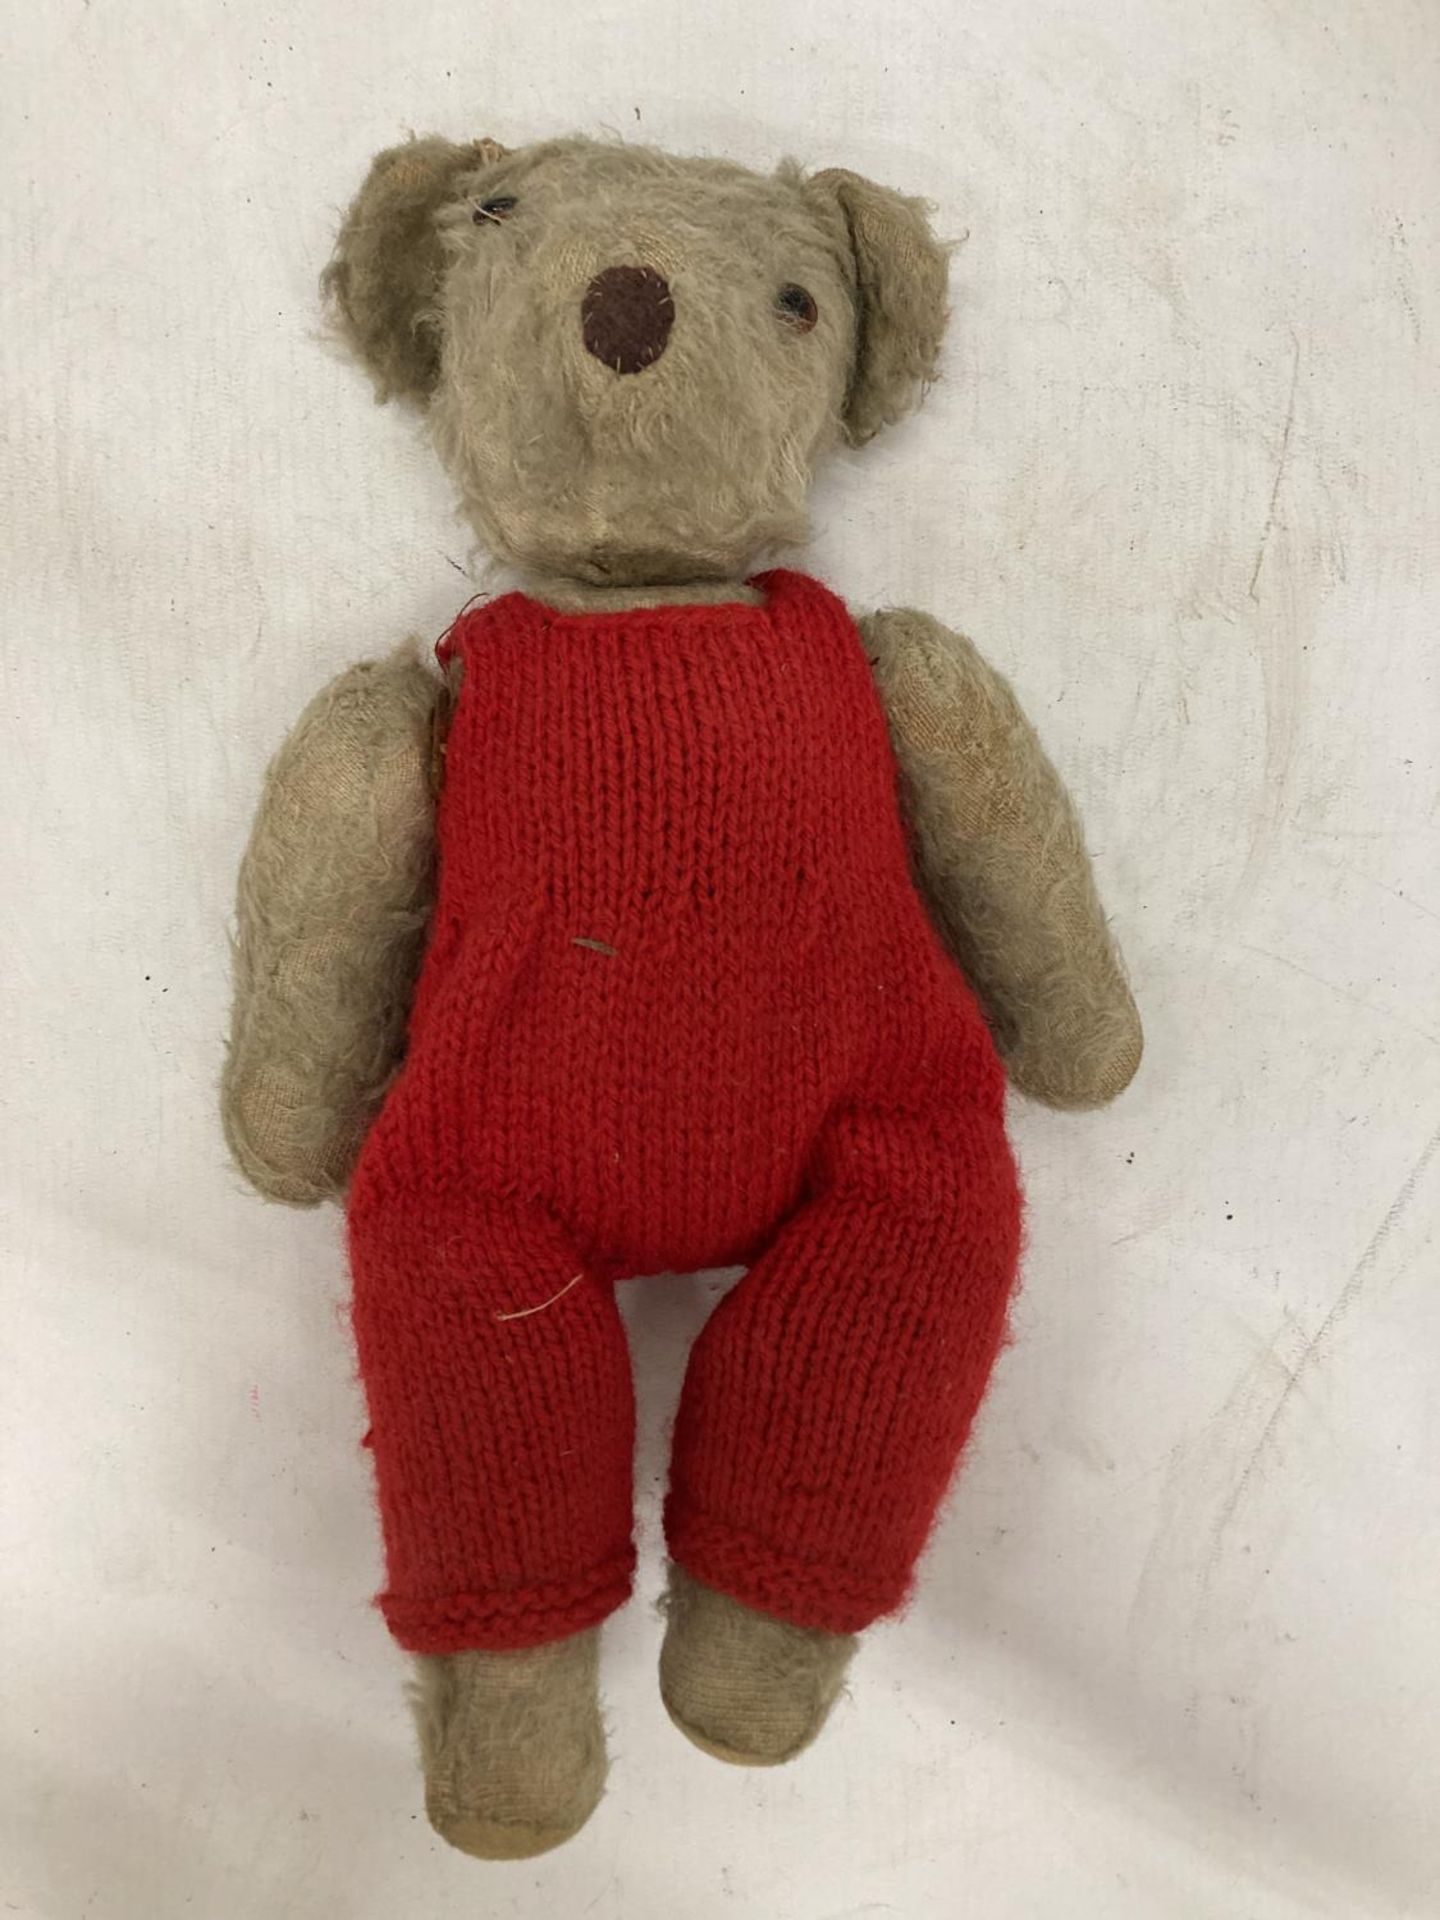 A VINTAGE TEDDY BEAR WITH JOINTED ARMS AND LEGS - Image 2 of 3